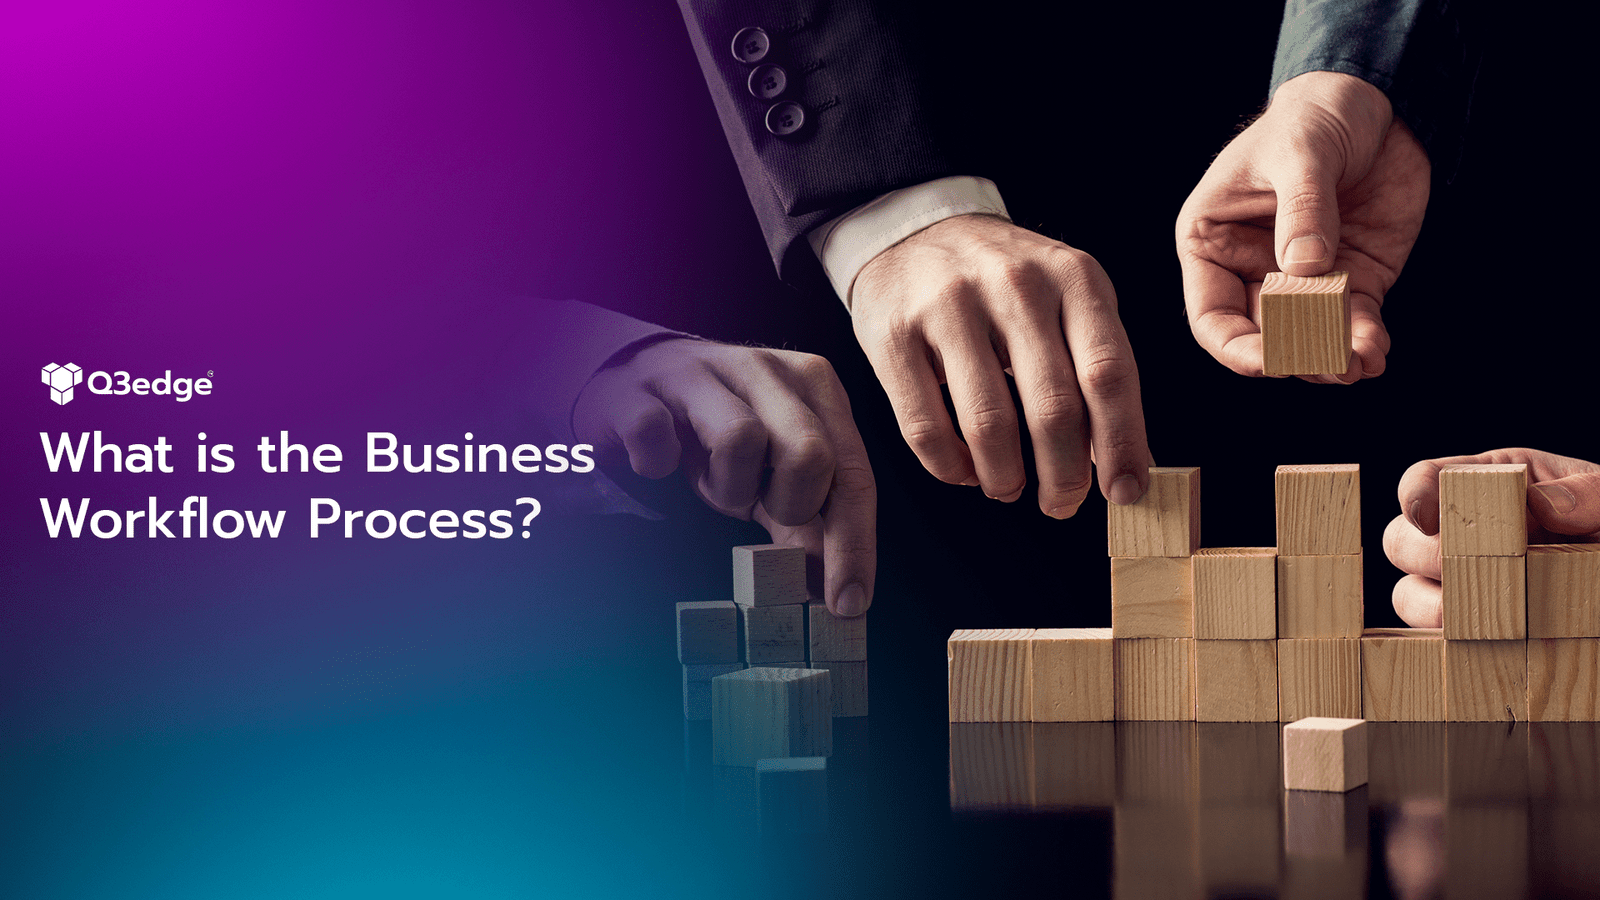 What is the Business Workflow Process